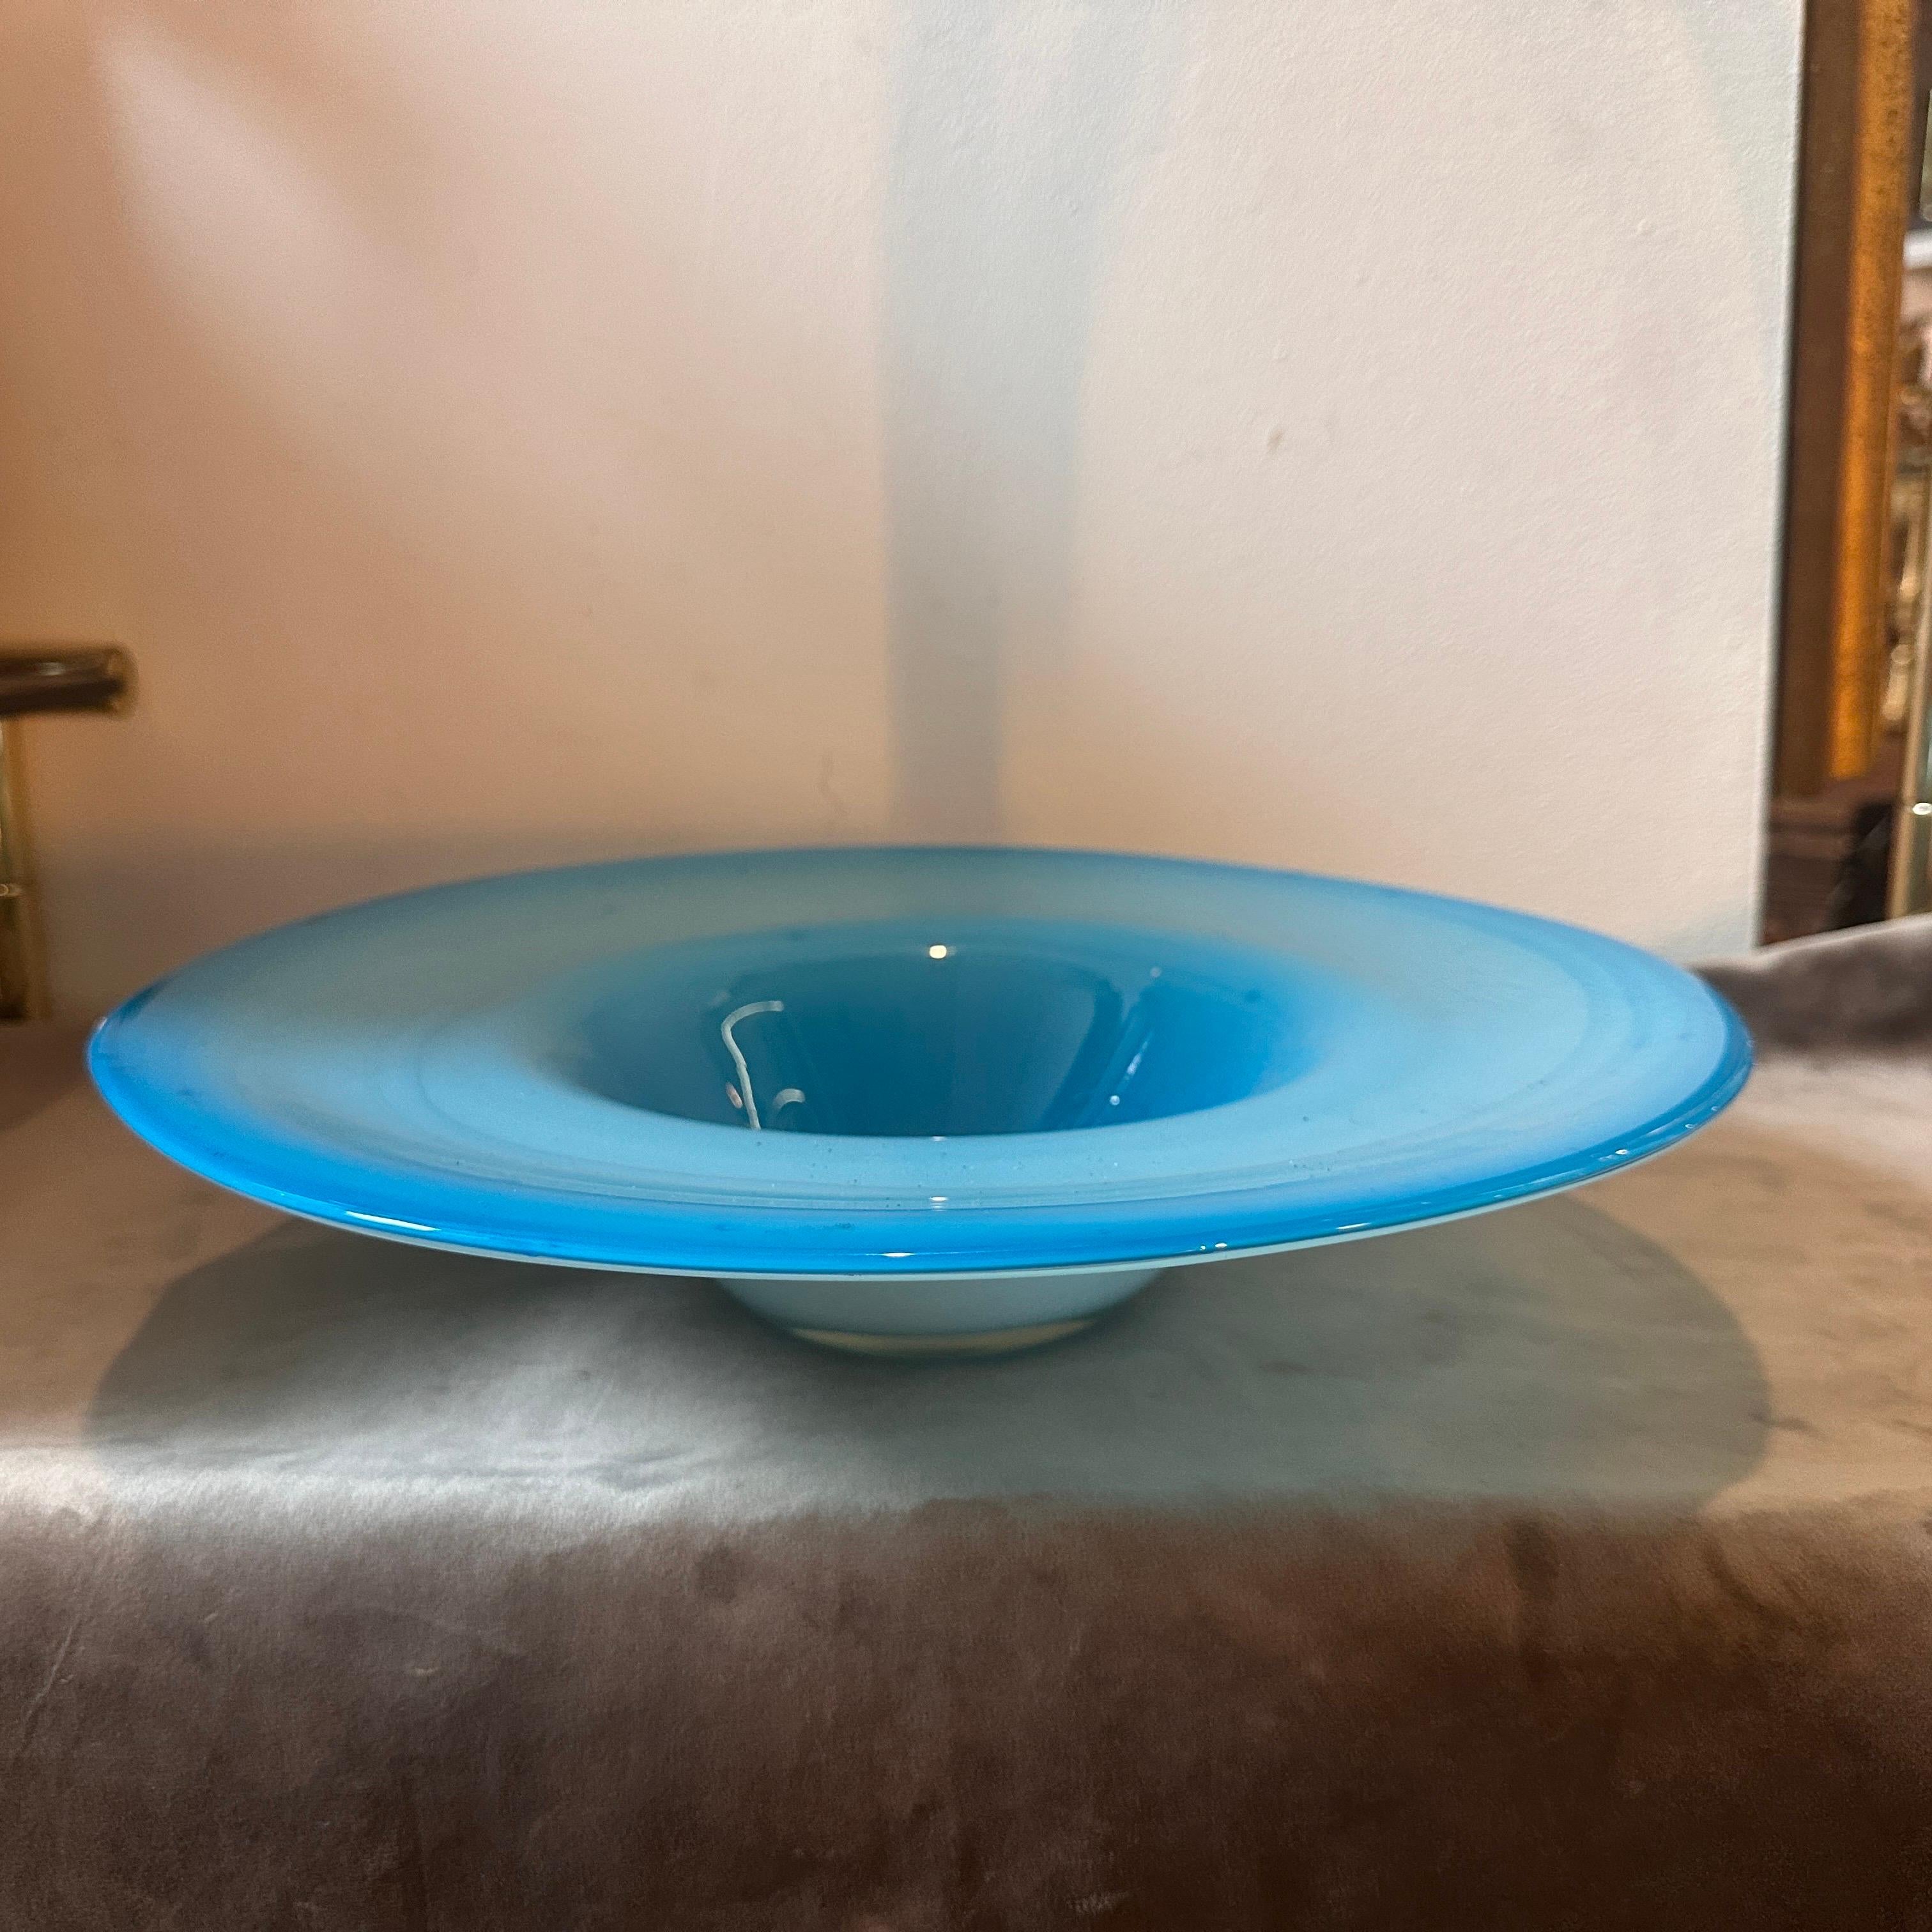 A 1980s Turquoise and White Murano Glass Centerpiece designed and manufactured in Italy in the style of Venini. This Round Centerpiece is a stunning decorative object that embodies the design sensibilities of the 1980s and showcases the renowned